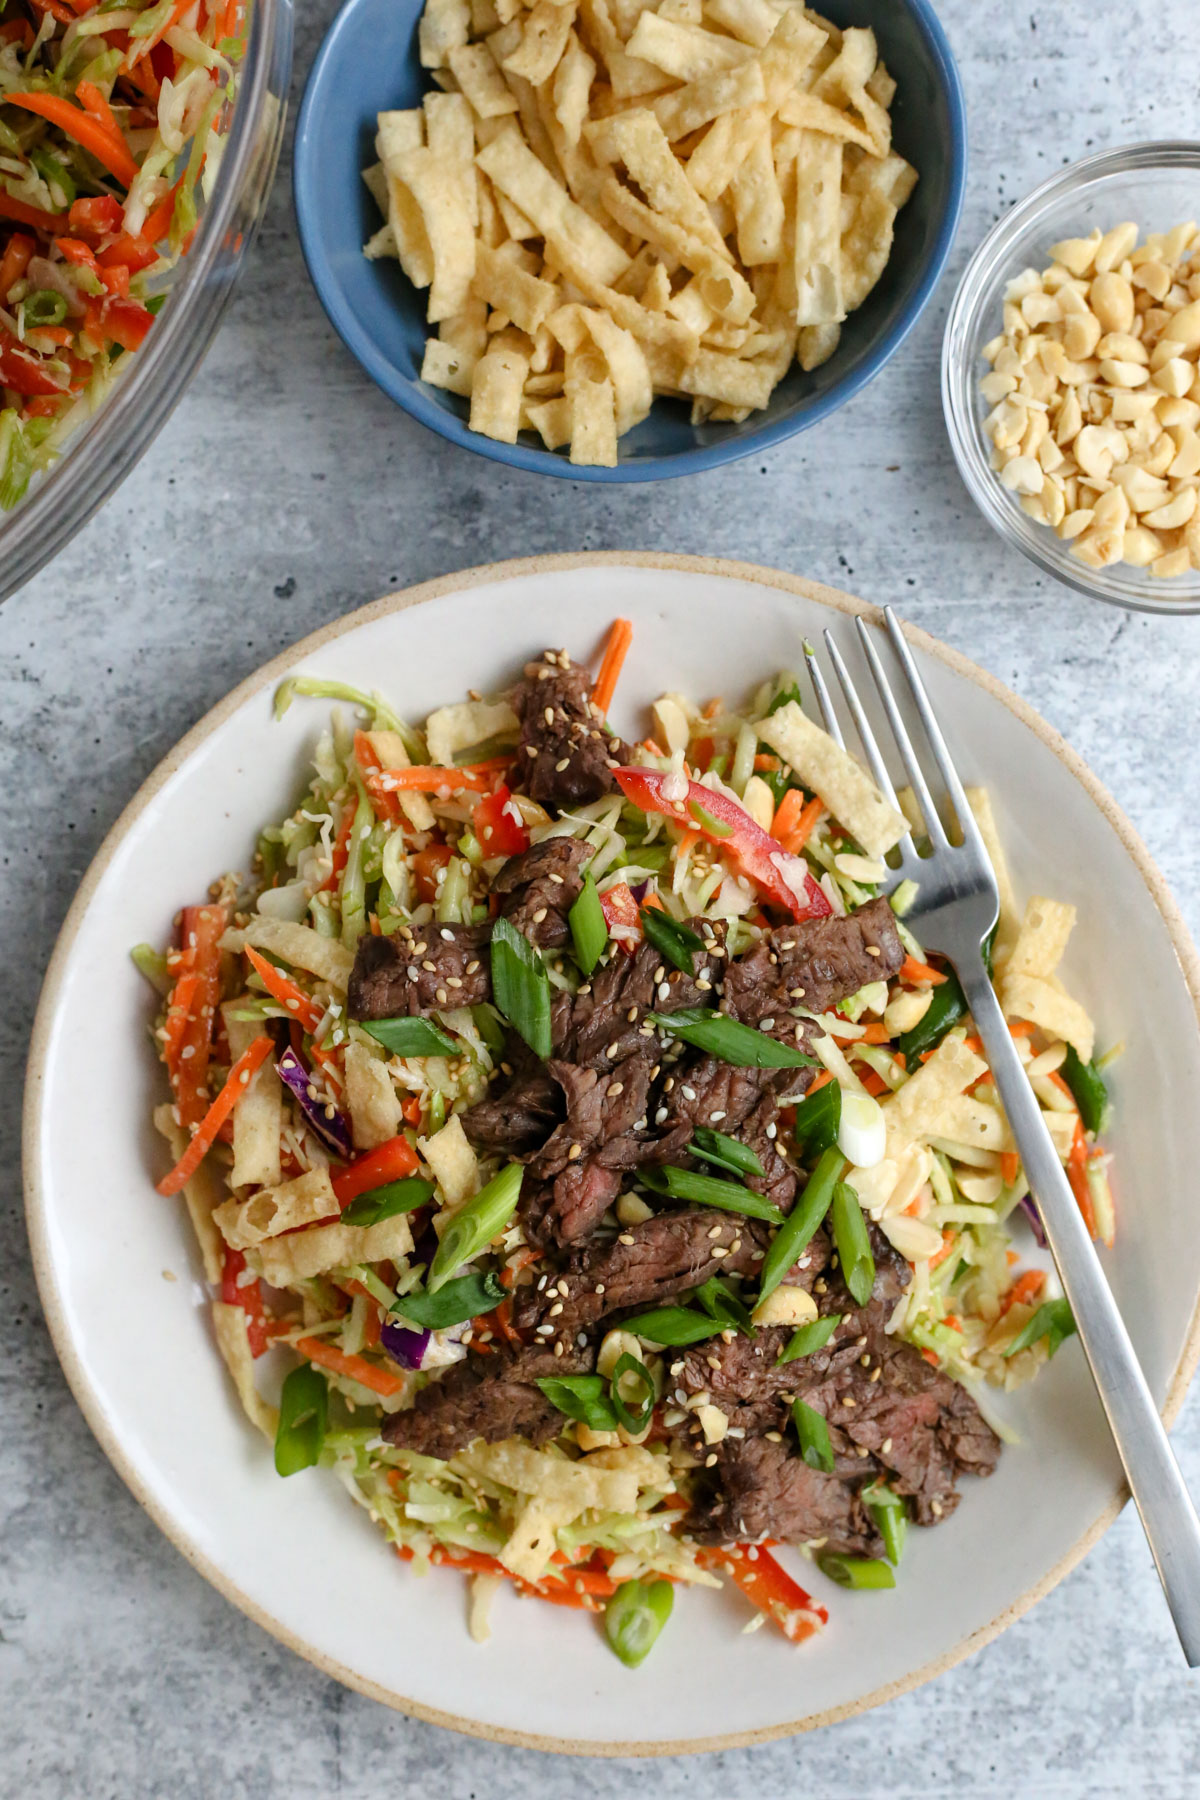 Overhead view of a skirt steak salad recipe with garnishes such as crispy wonton strips and chopped roasted peanuts